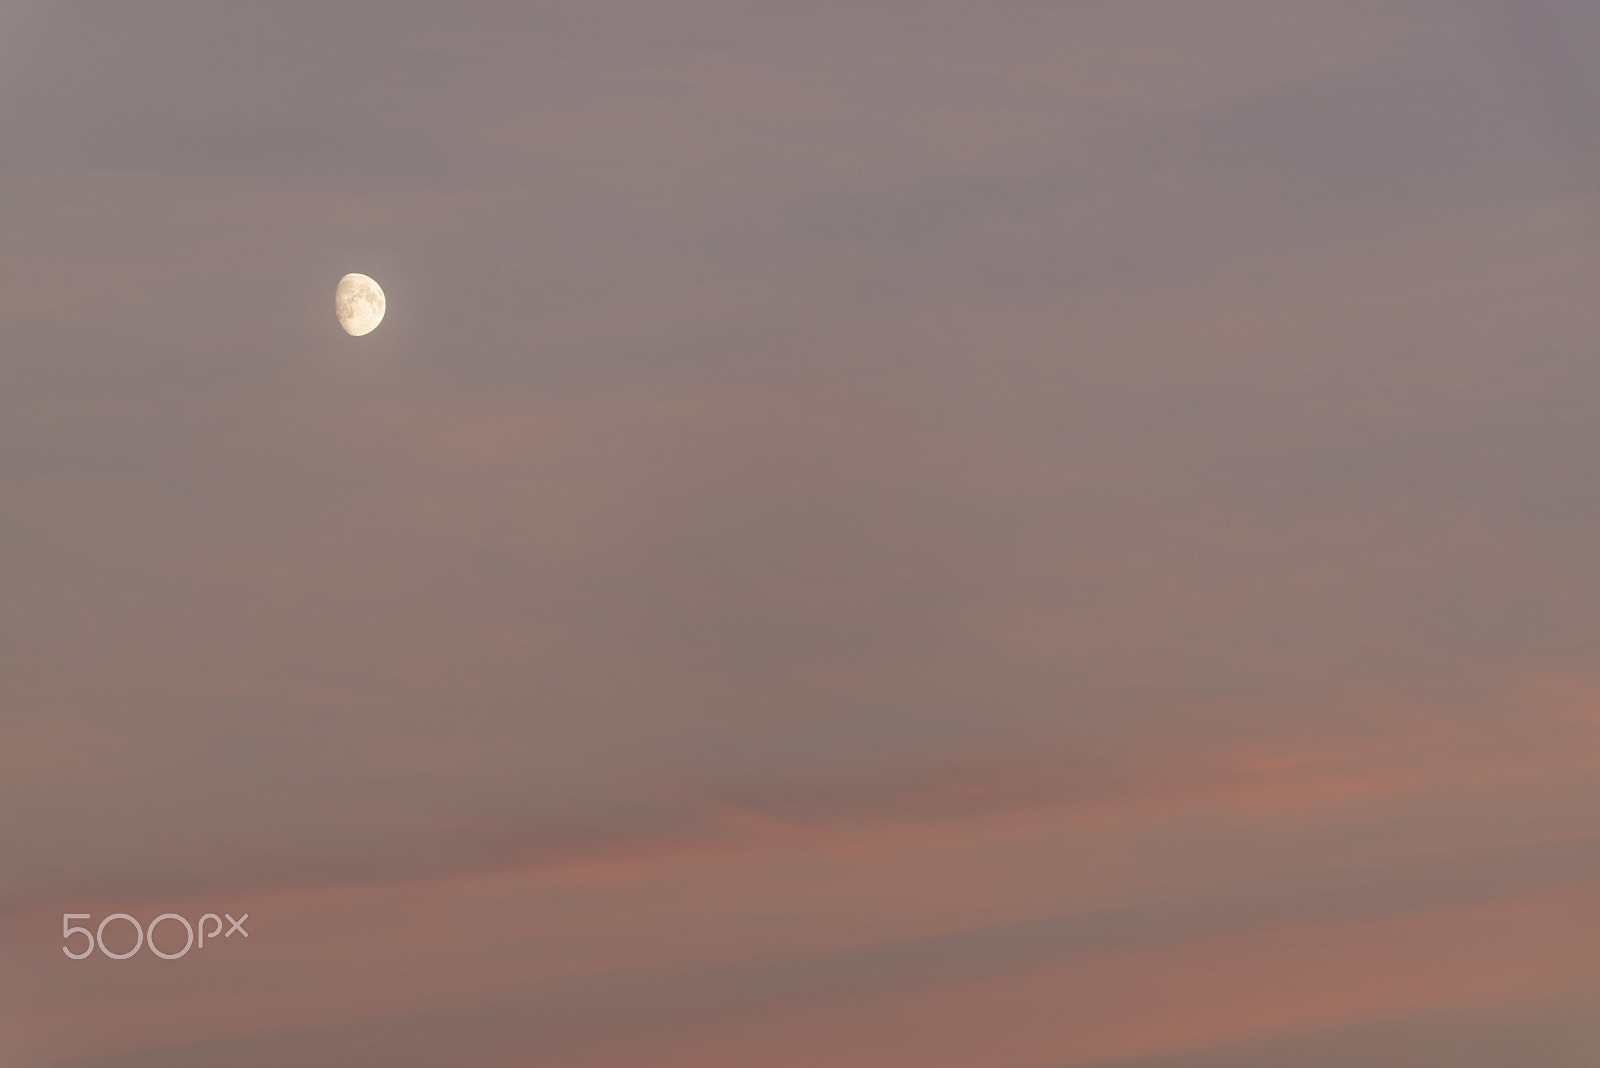 Nikon D800 sample photo. The moon in sunset photography